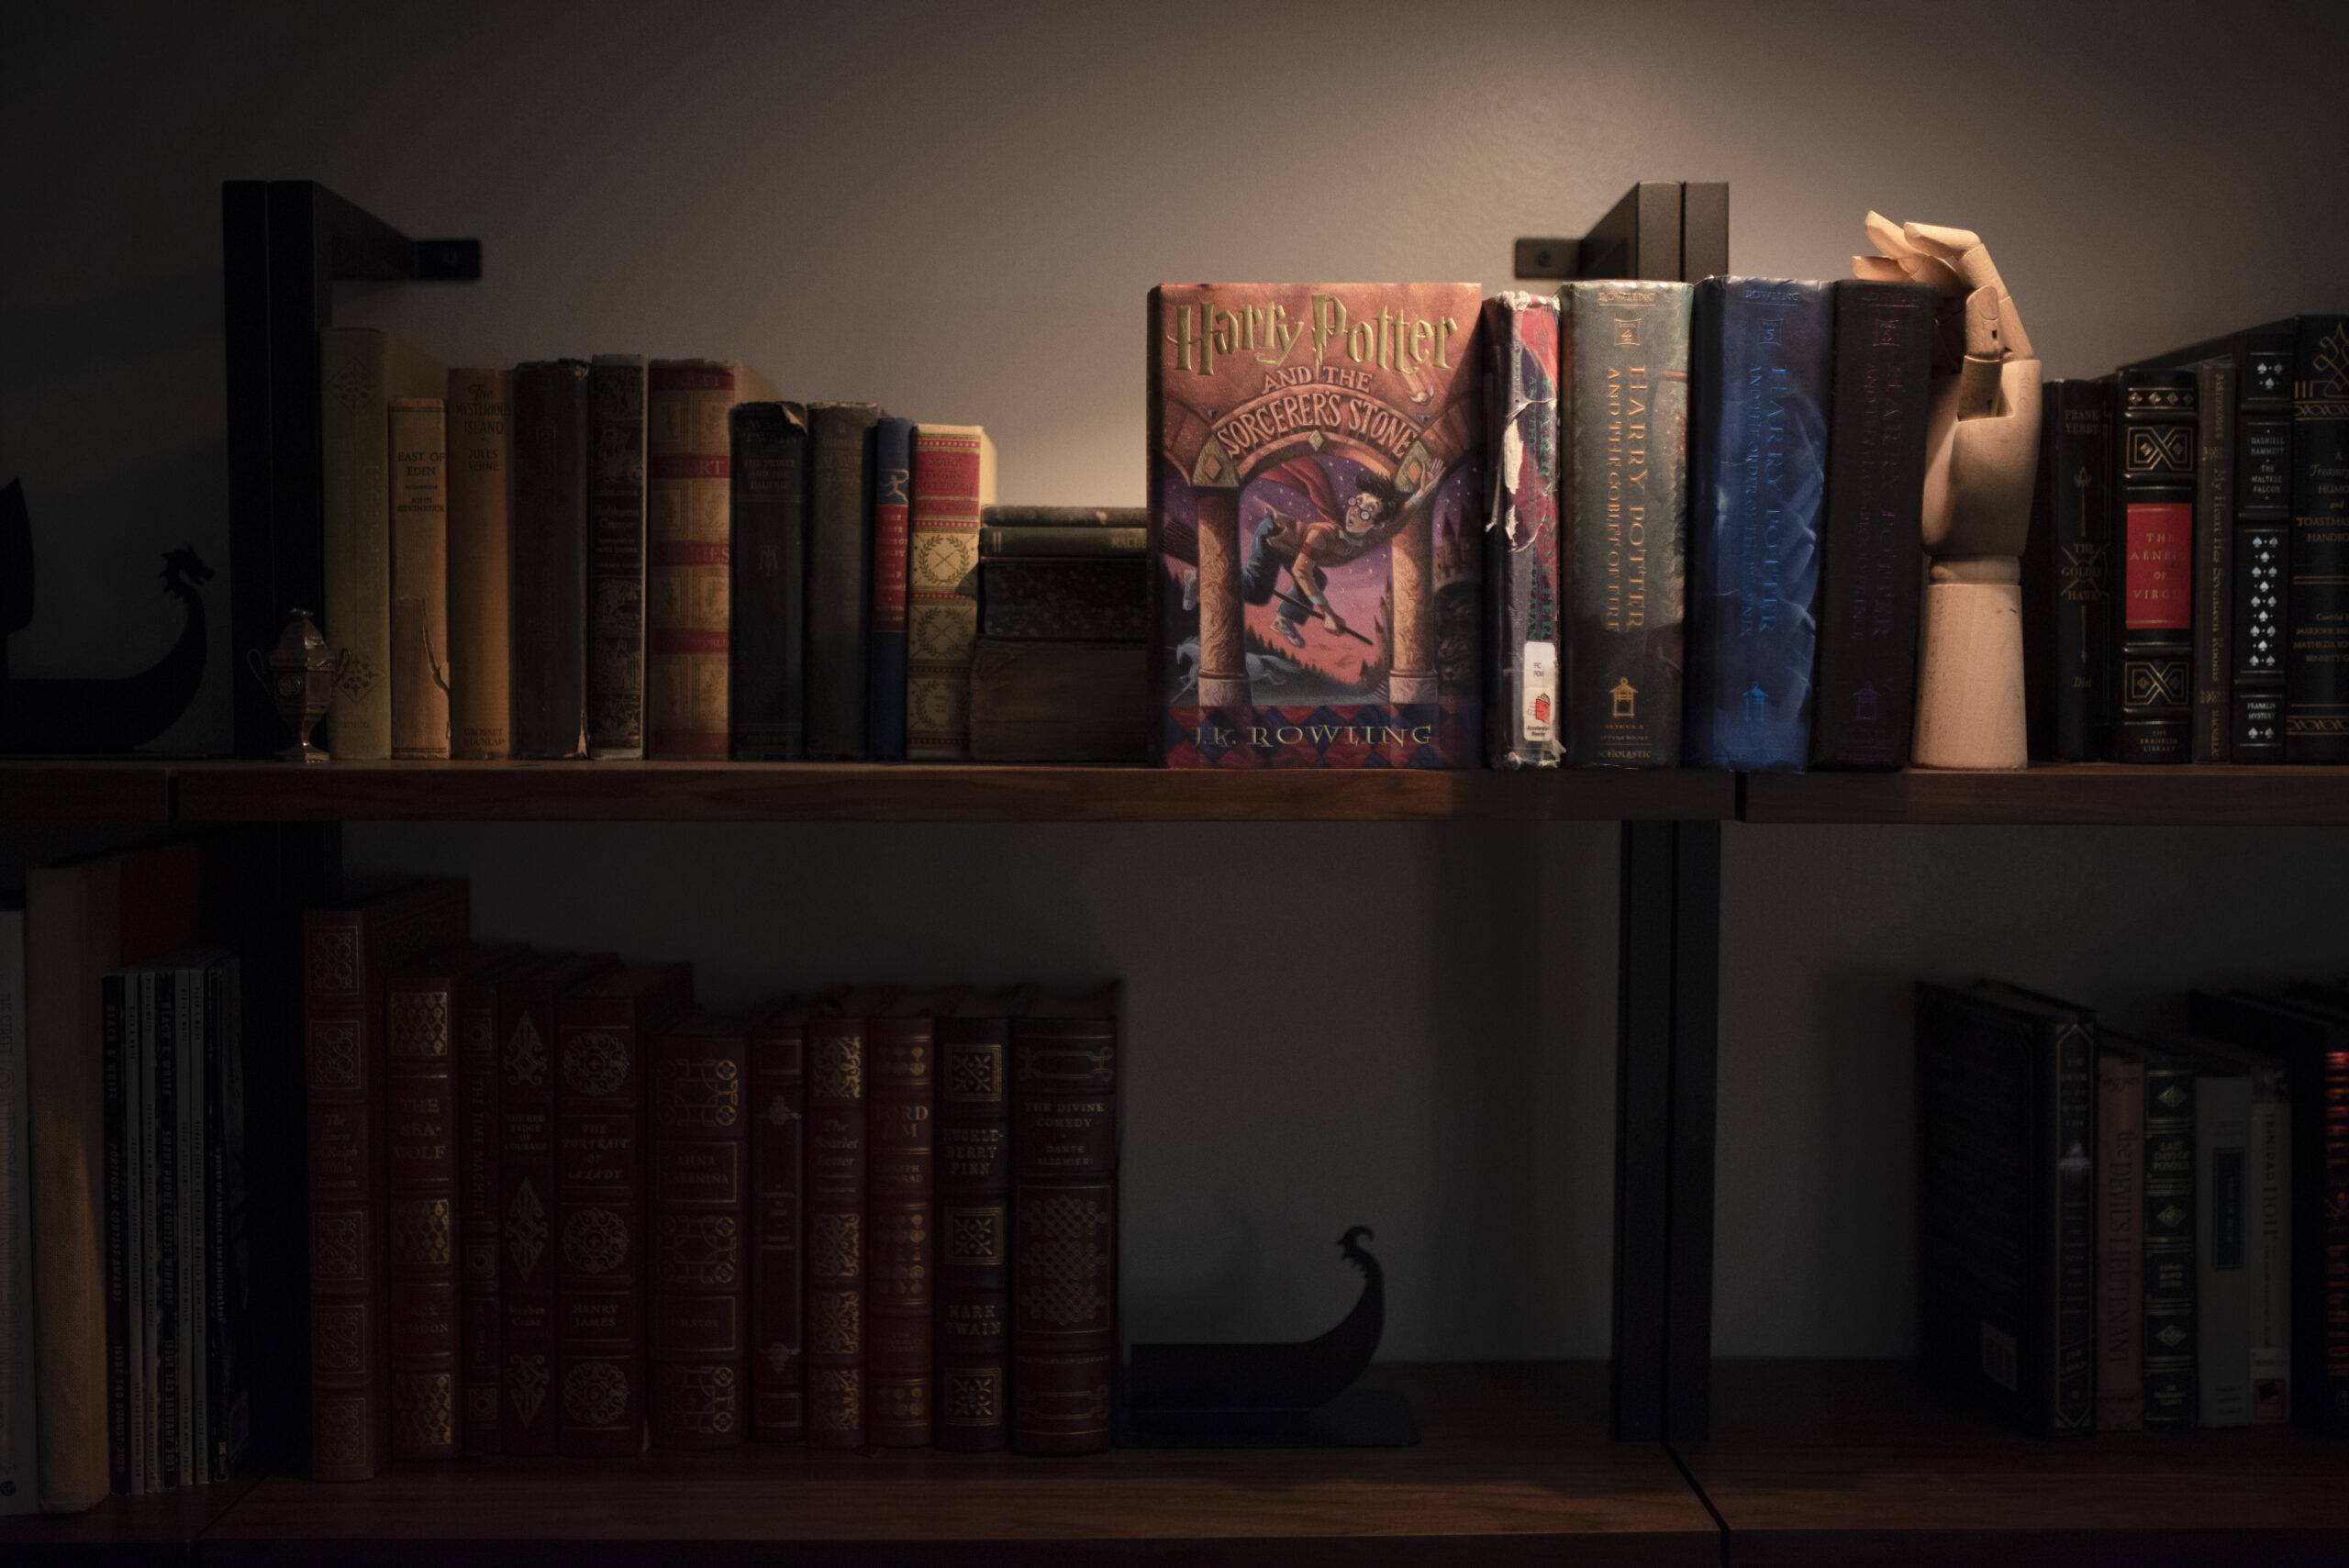 Rows of books on a bookshelf cast in shadow, a single spotlight illuminates several books from J.K. Rowling's "Harry Potter" series.